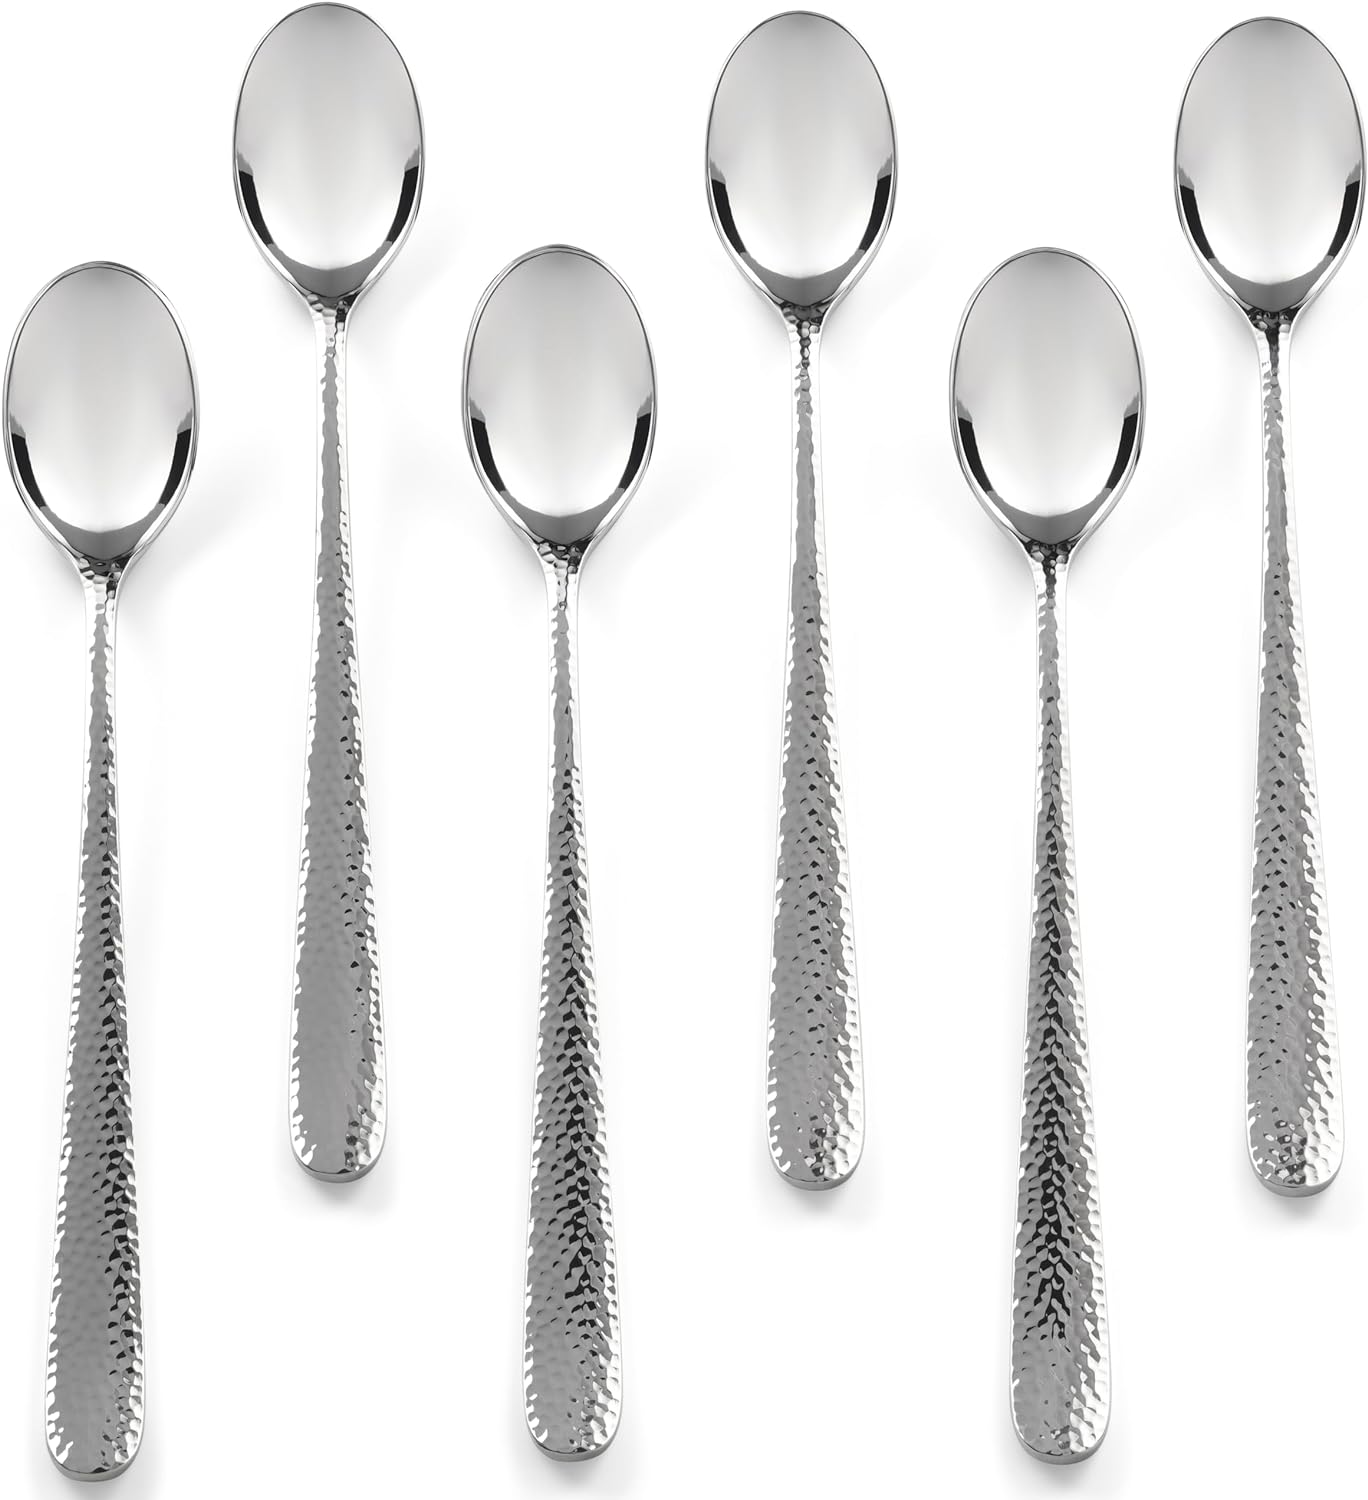 Hudson Essentials Hammered Iced Tea Spoons, 18/10 Stainless Steel Long Handle Spoons for Stirring Cocktails, Tea, Coffee, Set of 6 - Bergamo